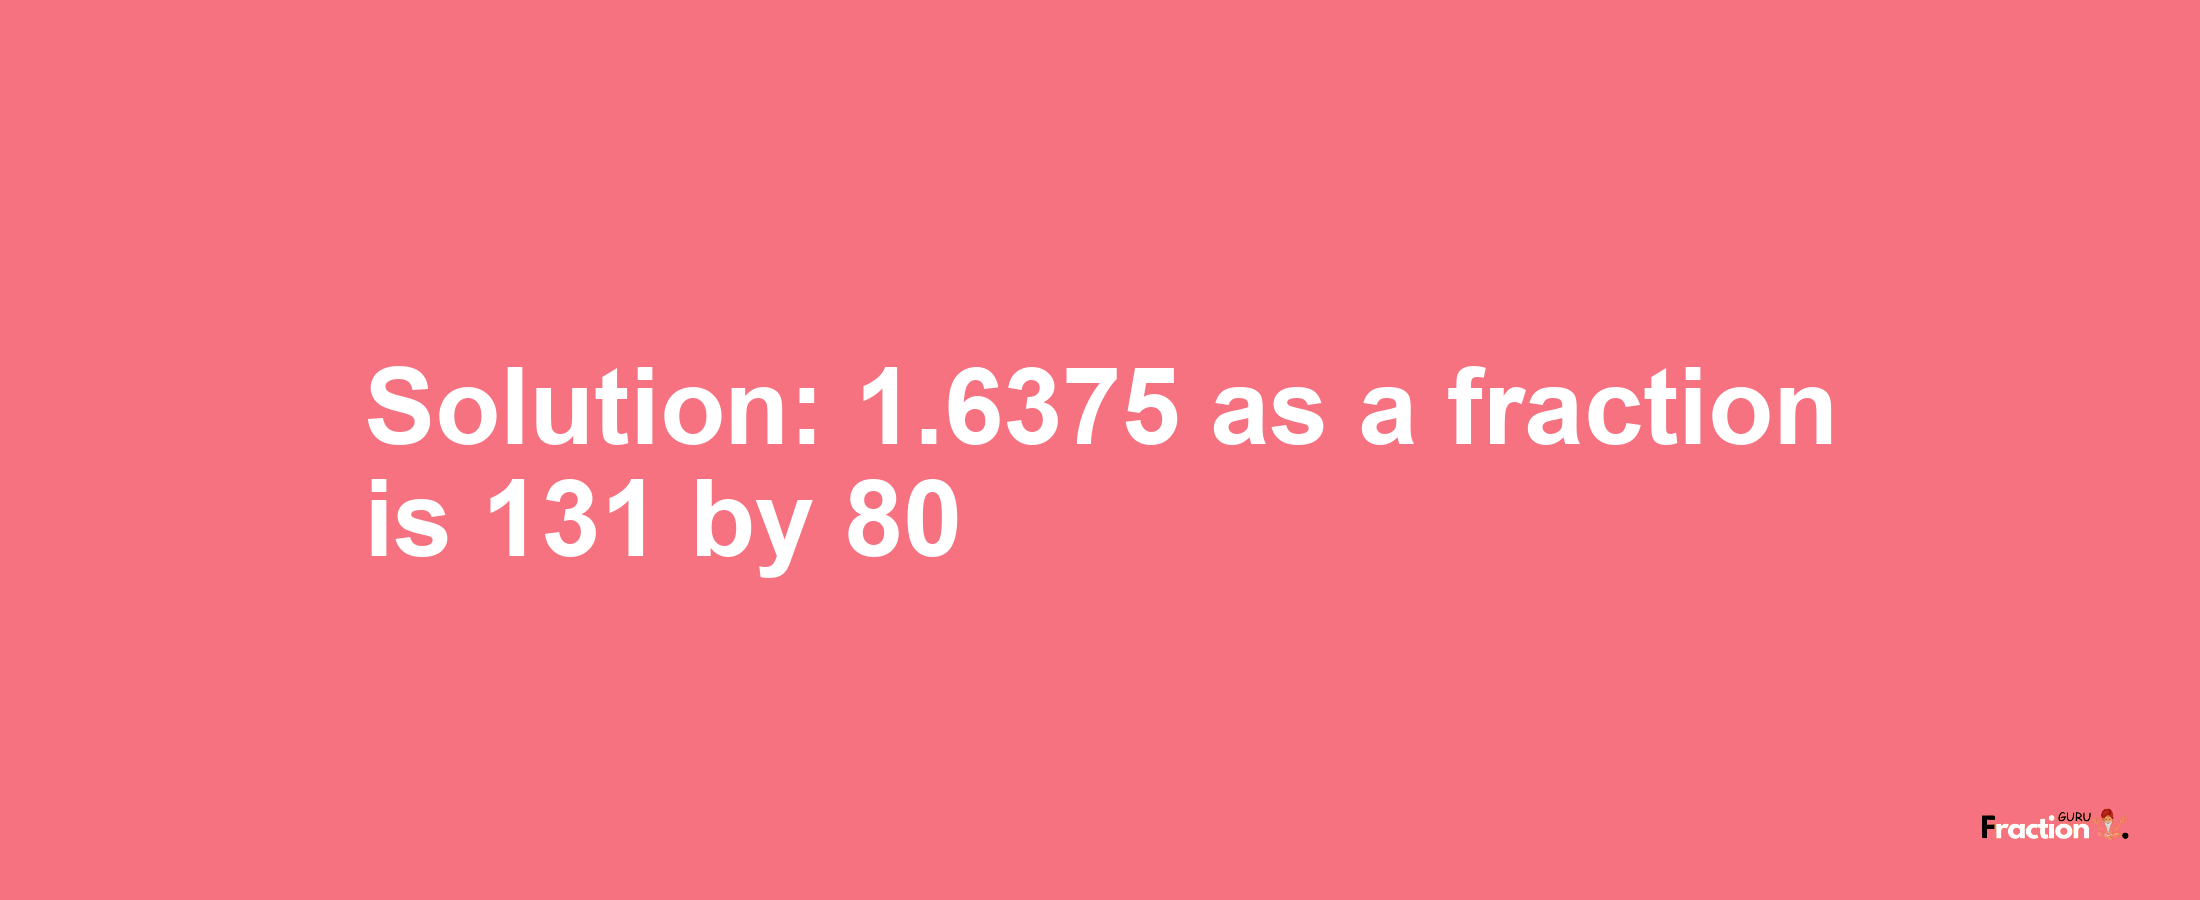 Solution:1.6375 as a fraction is 131/80